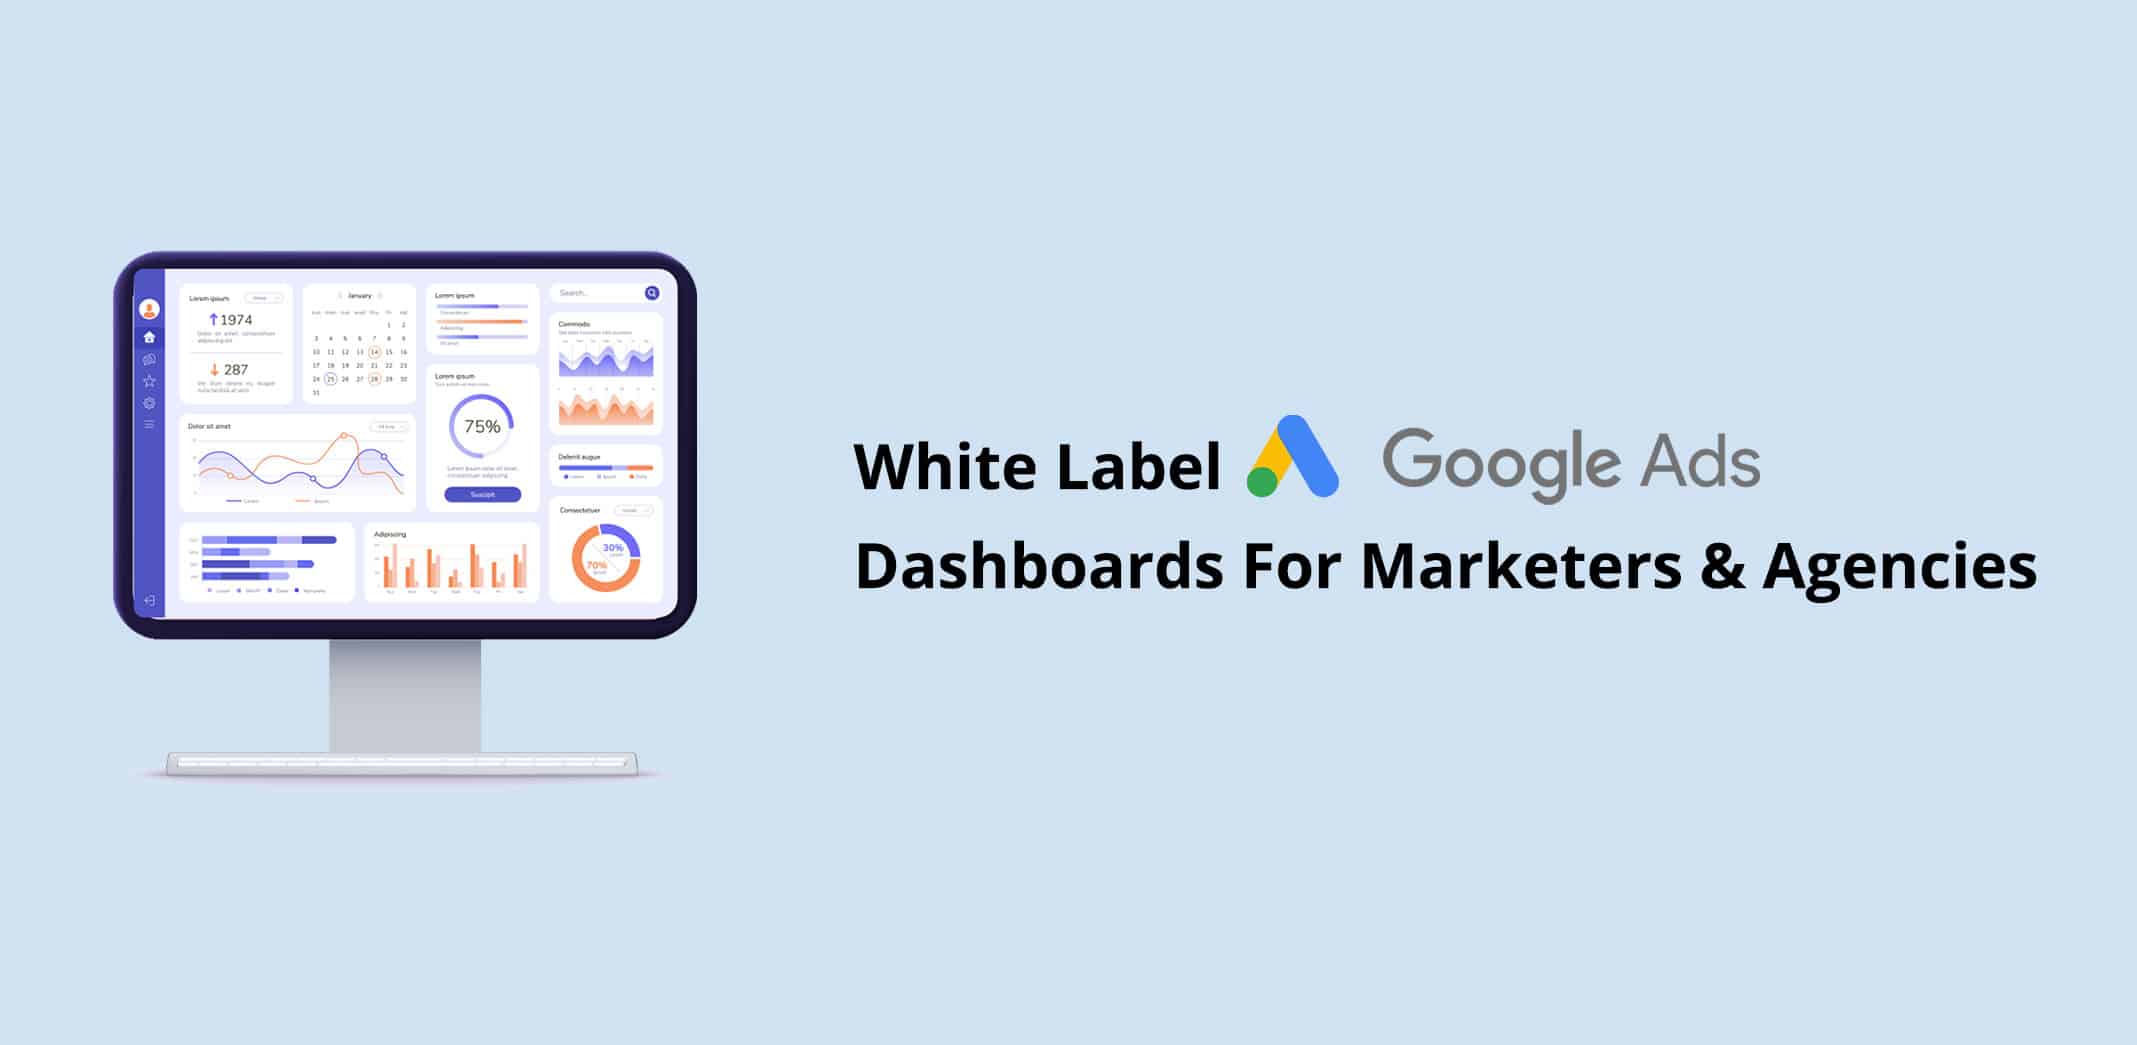 White Label Google Ads Dashboards For Marketers & Agencies